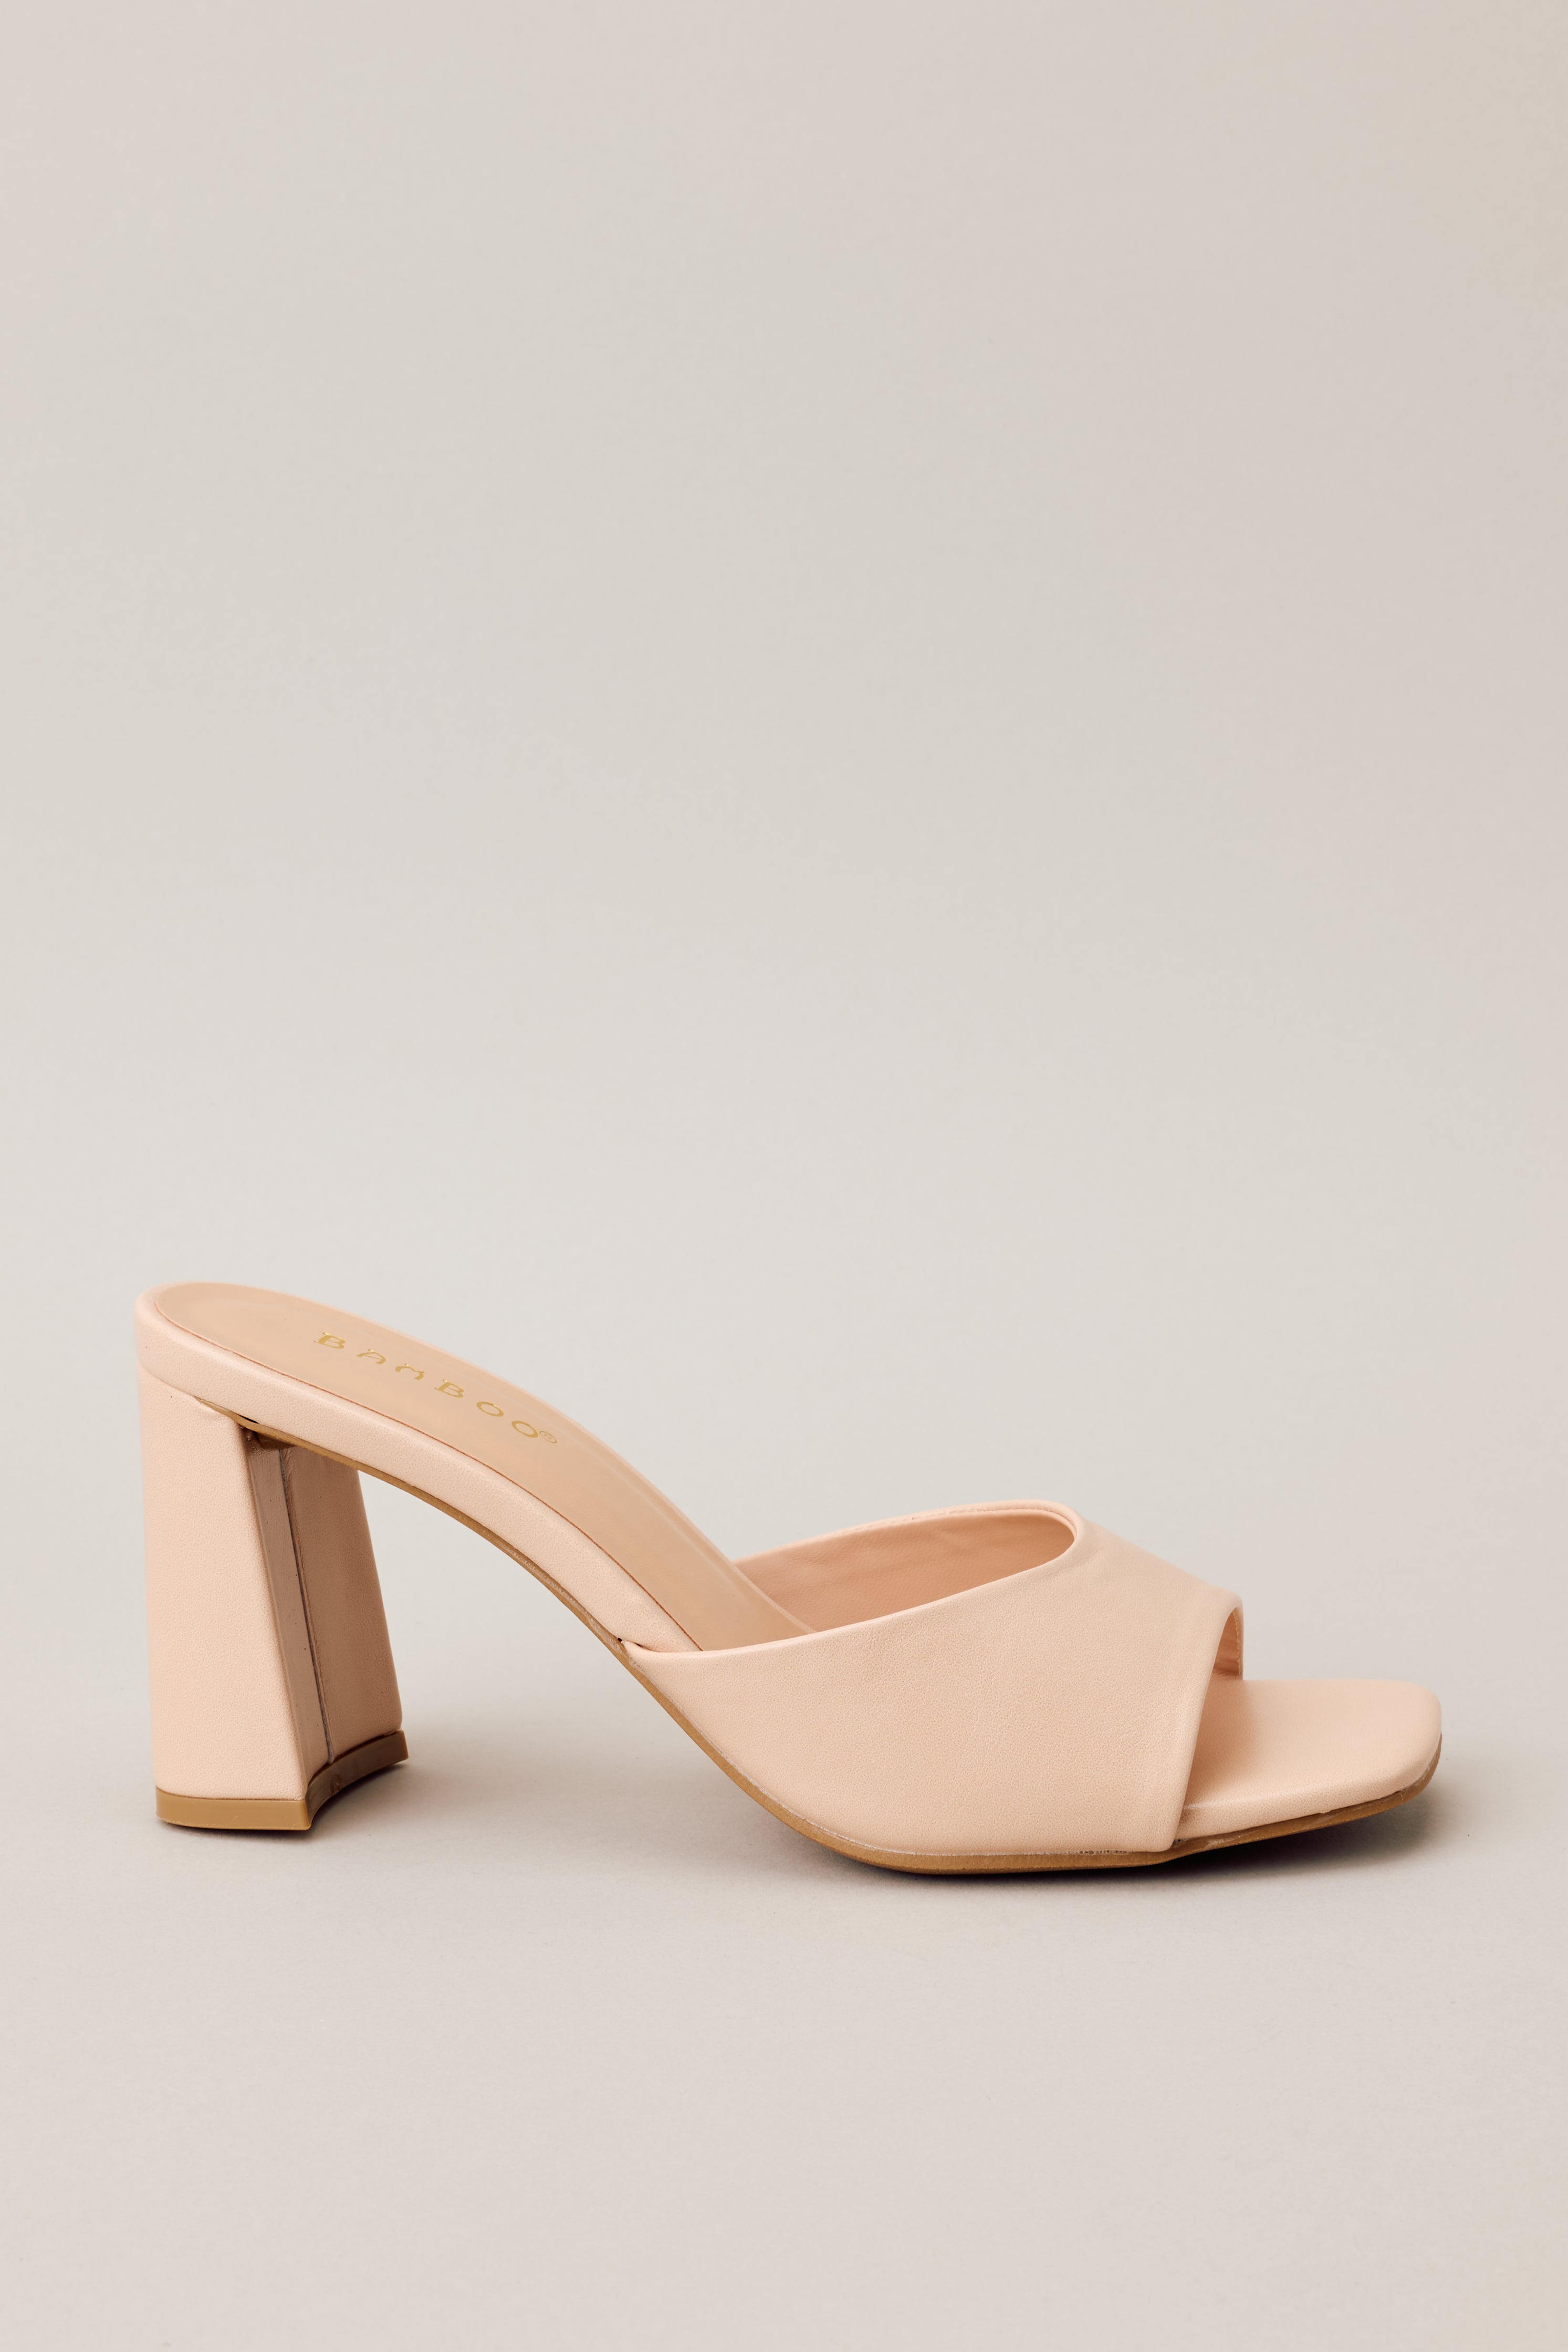 Side view of these beige heels that feature a square toe, a slip-on design, a strap over the top of the foot, and a thick block heel.